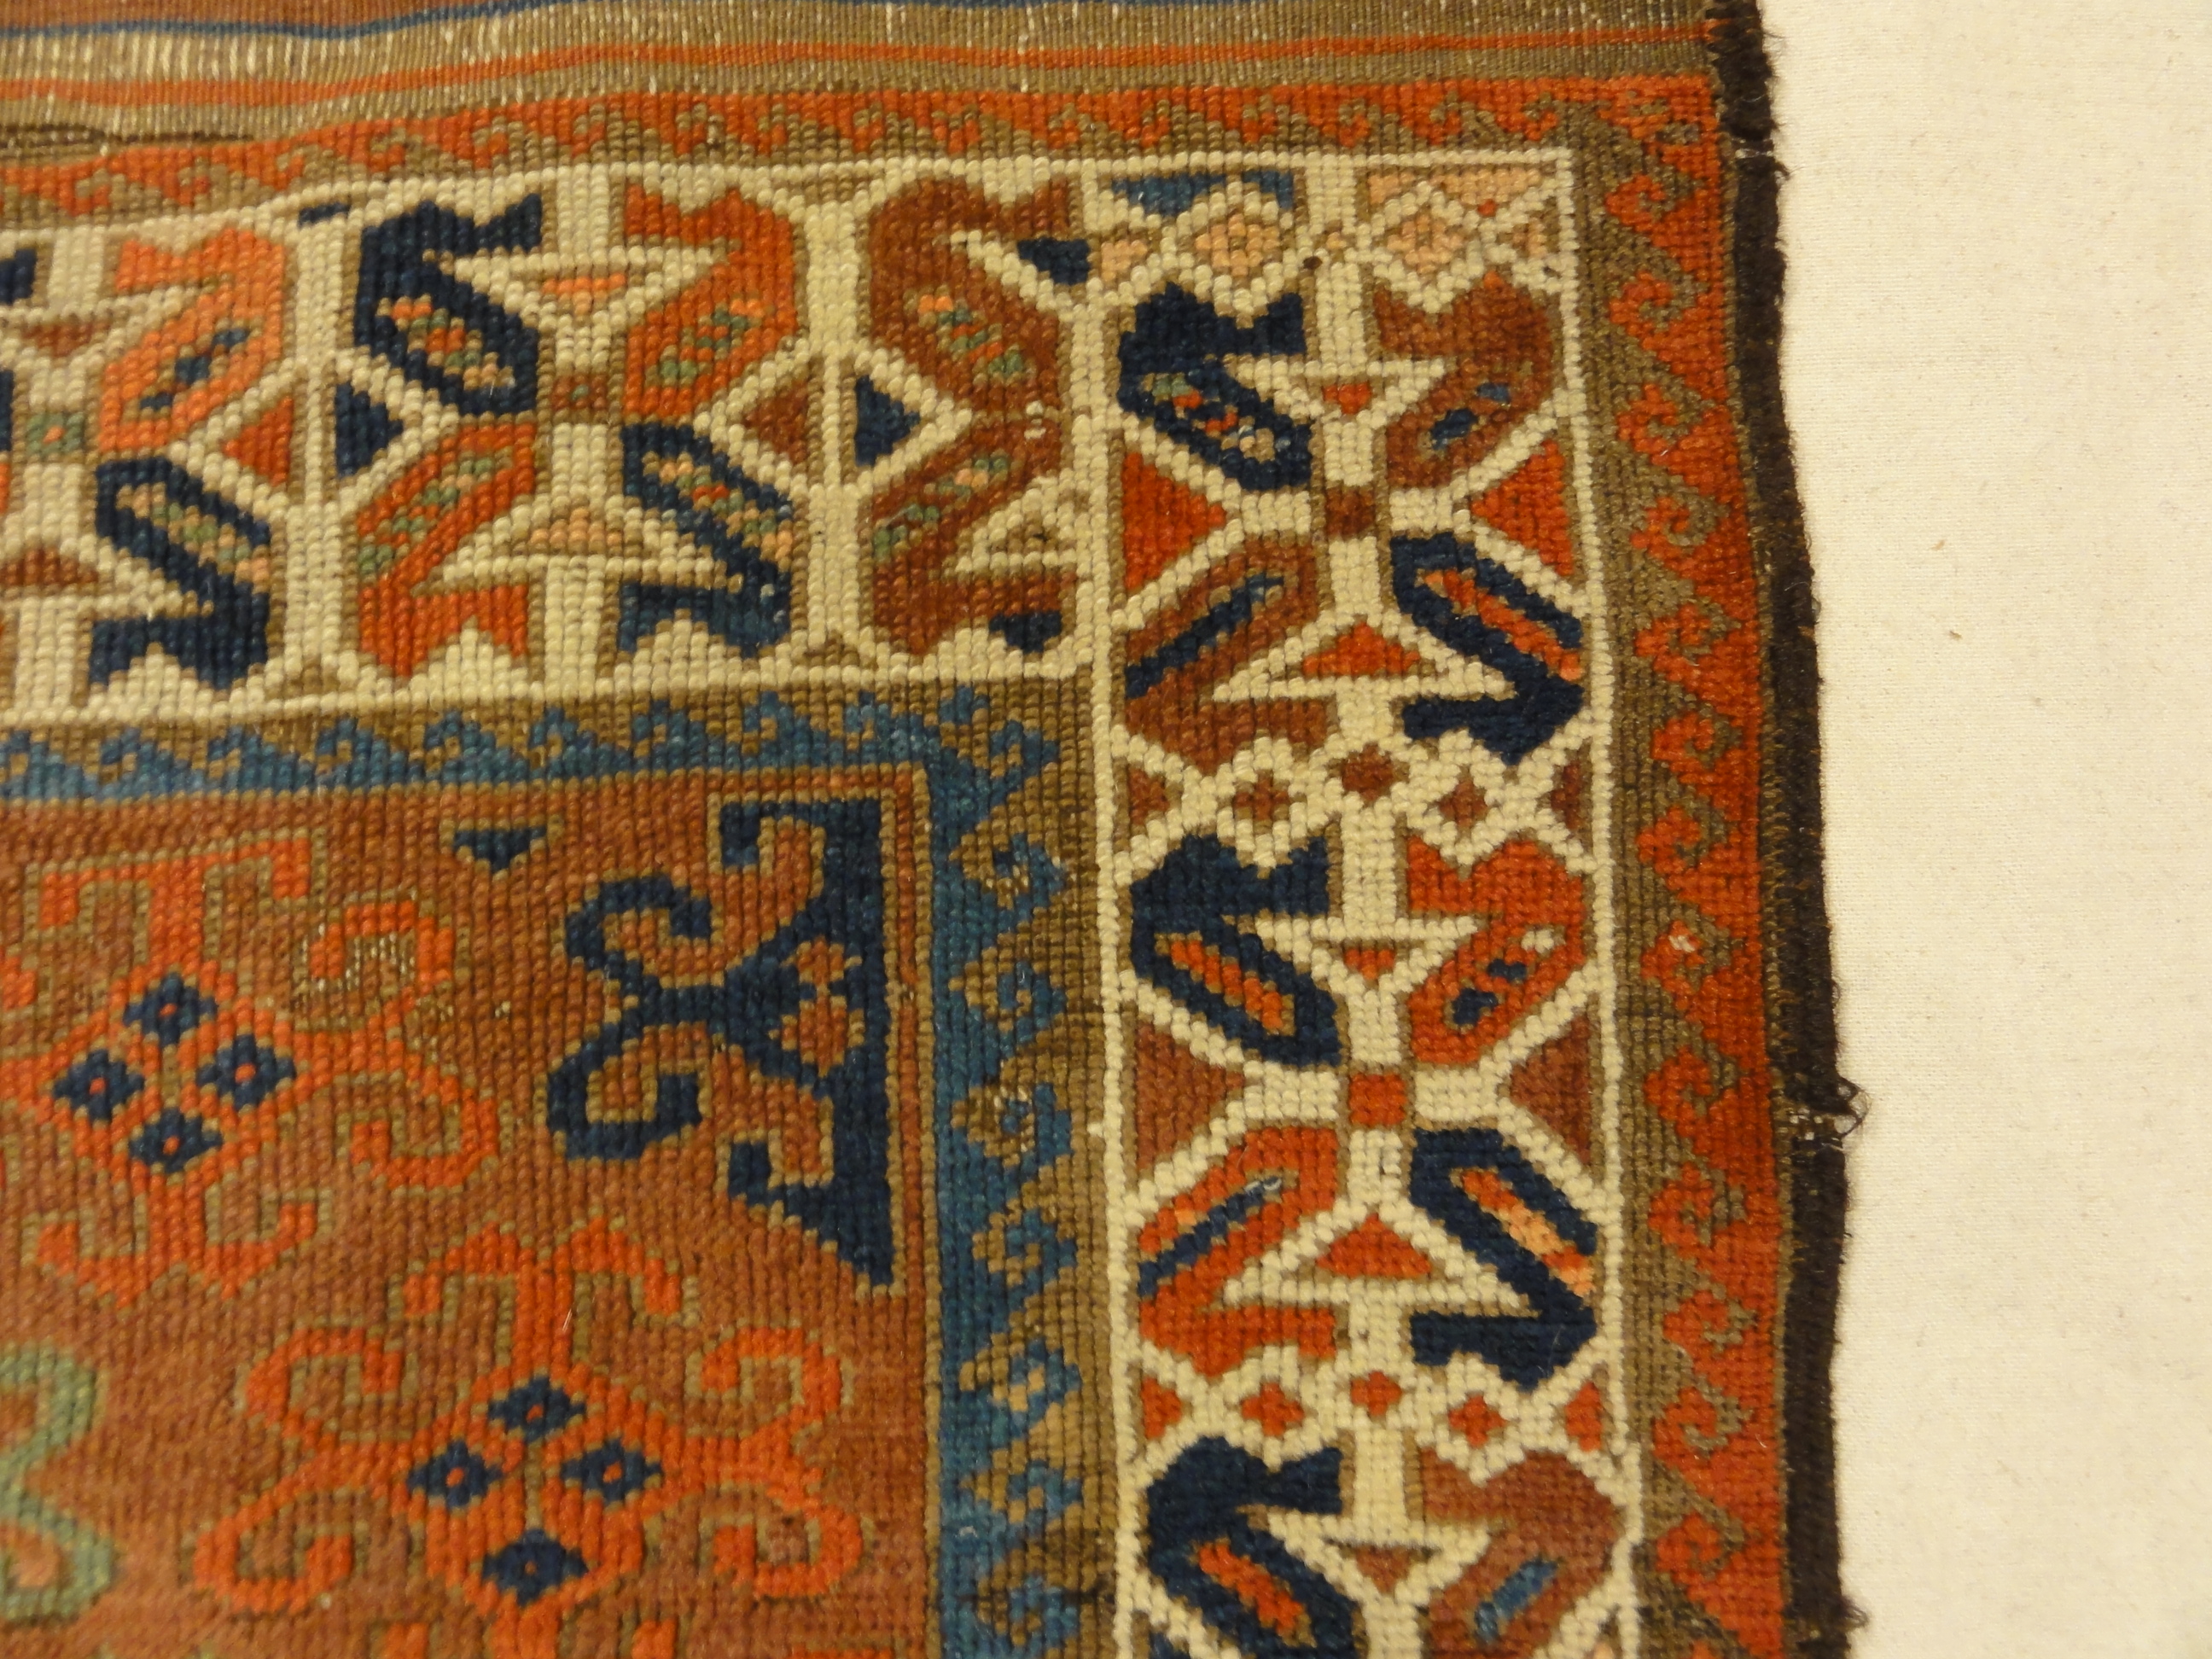 Unique Colorful Circa 1890s Beluch. A piece of genuine authentic woven carpet art sold by Santa Barbara Design Center Rugs and More.